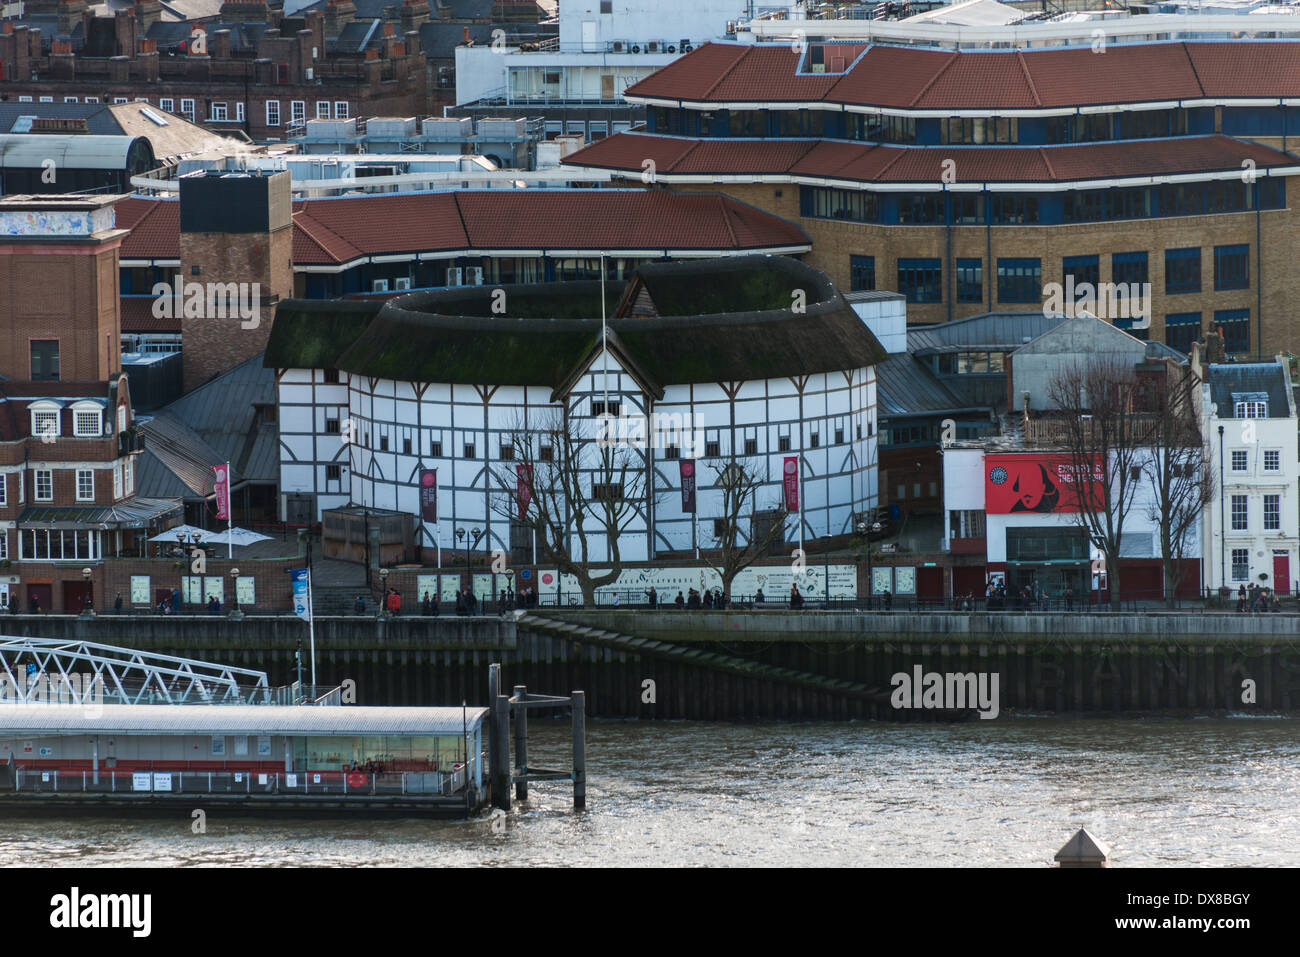 Shakespeare's Globe Theatre on the banks of the River Thames, London Stock Photo